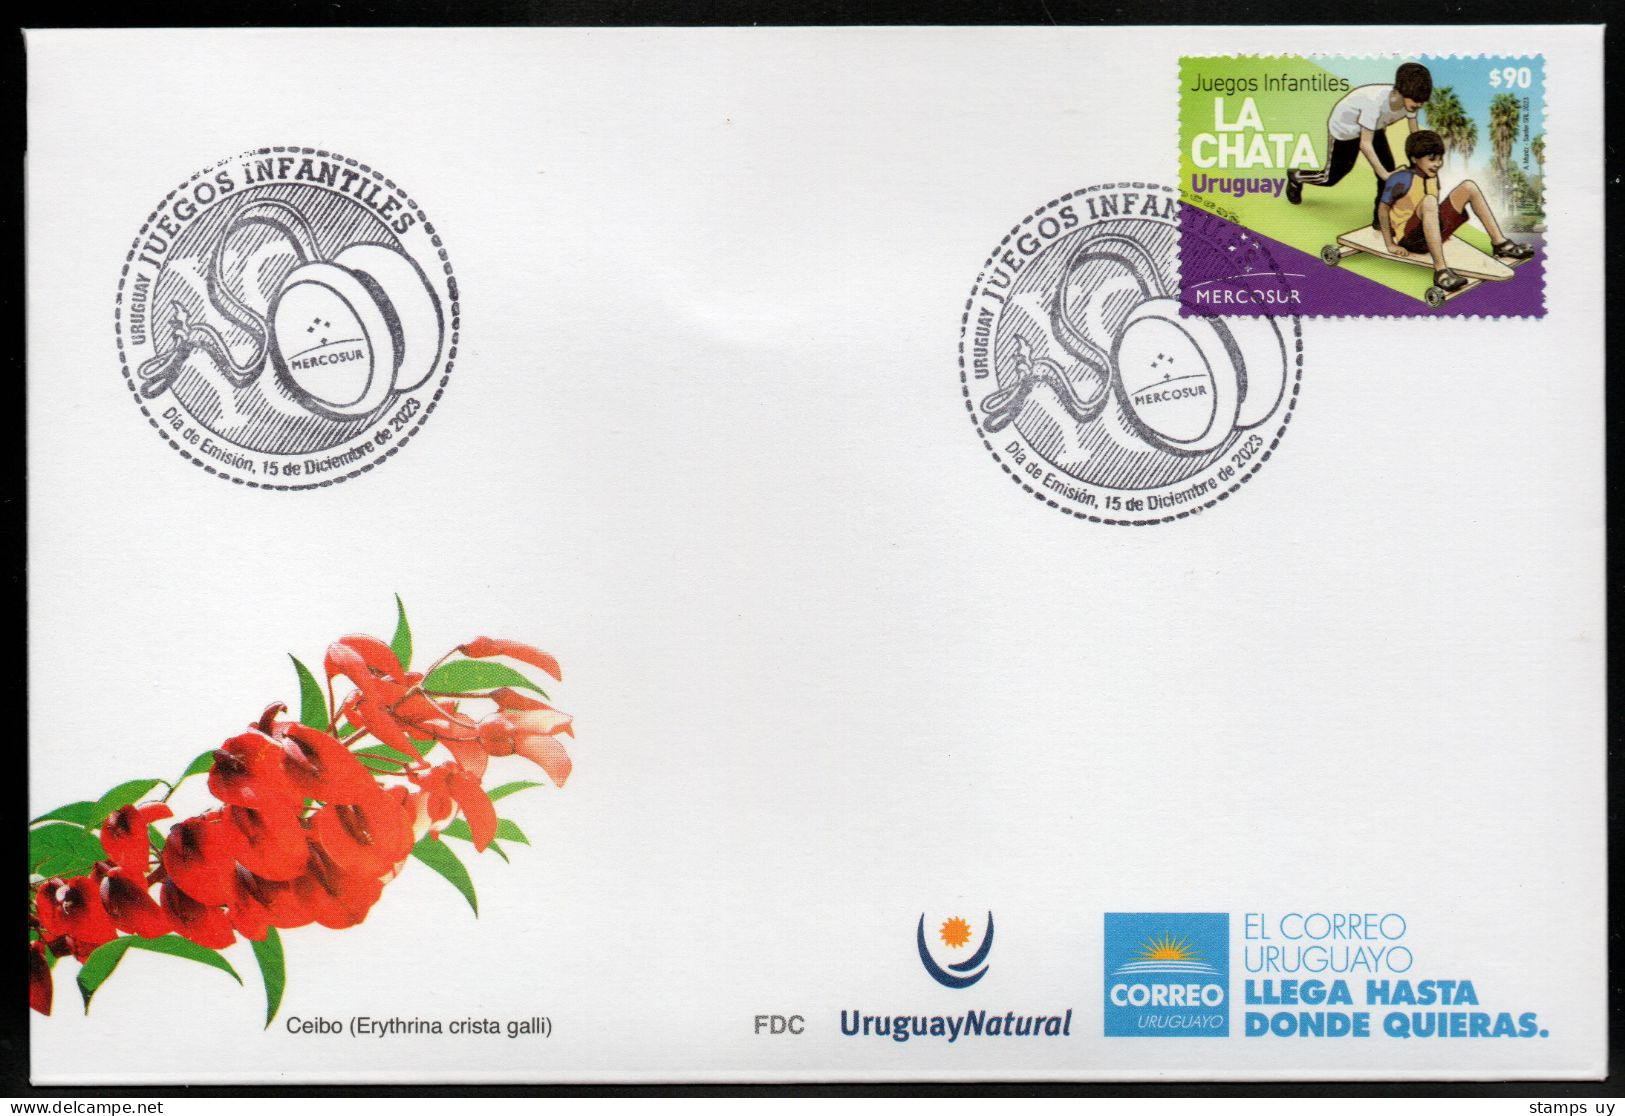 URUGUAY 2023 (Joint Issue, Mercosur, Games, Children, Toys, Wooden Cart, YoYo, Ruleman, Palm, Tree, Crux, Stars) - 1 FDC - Andere (Aarde)